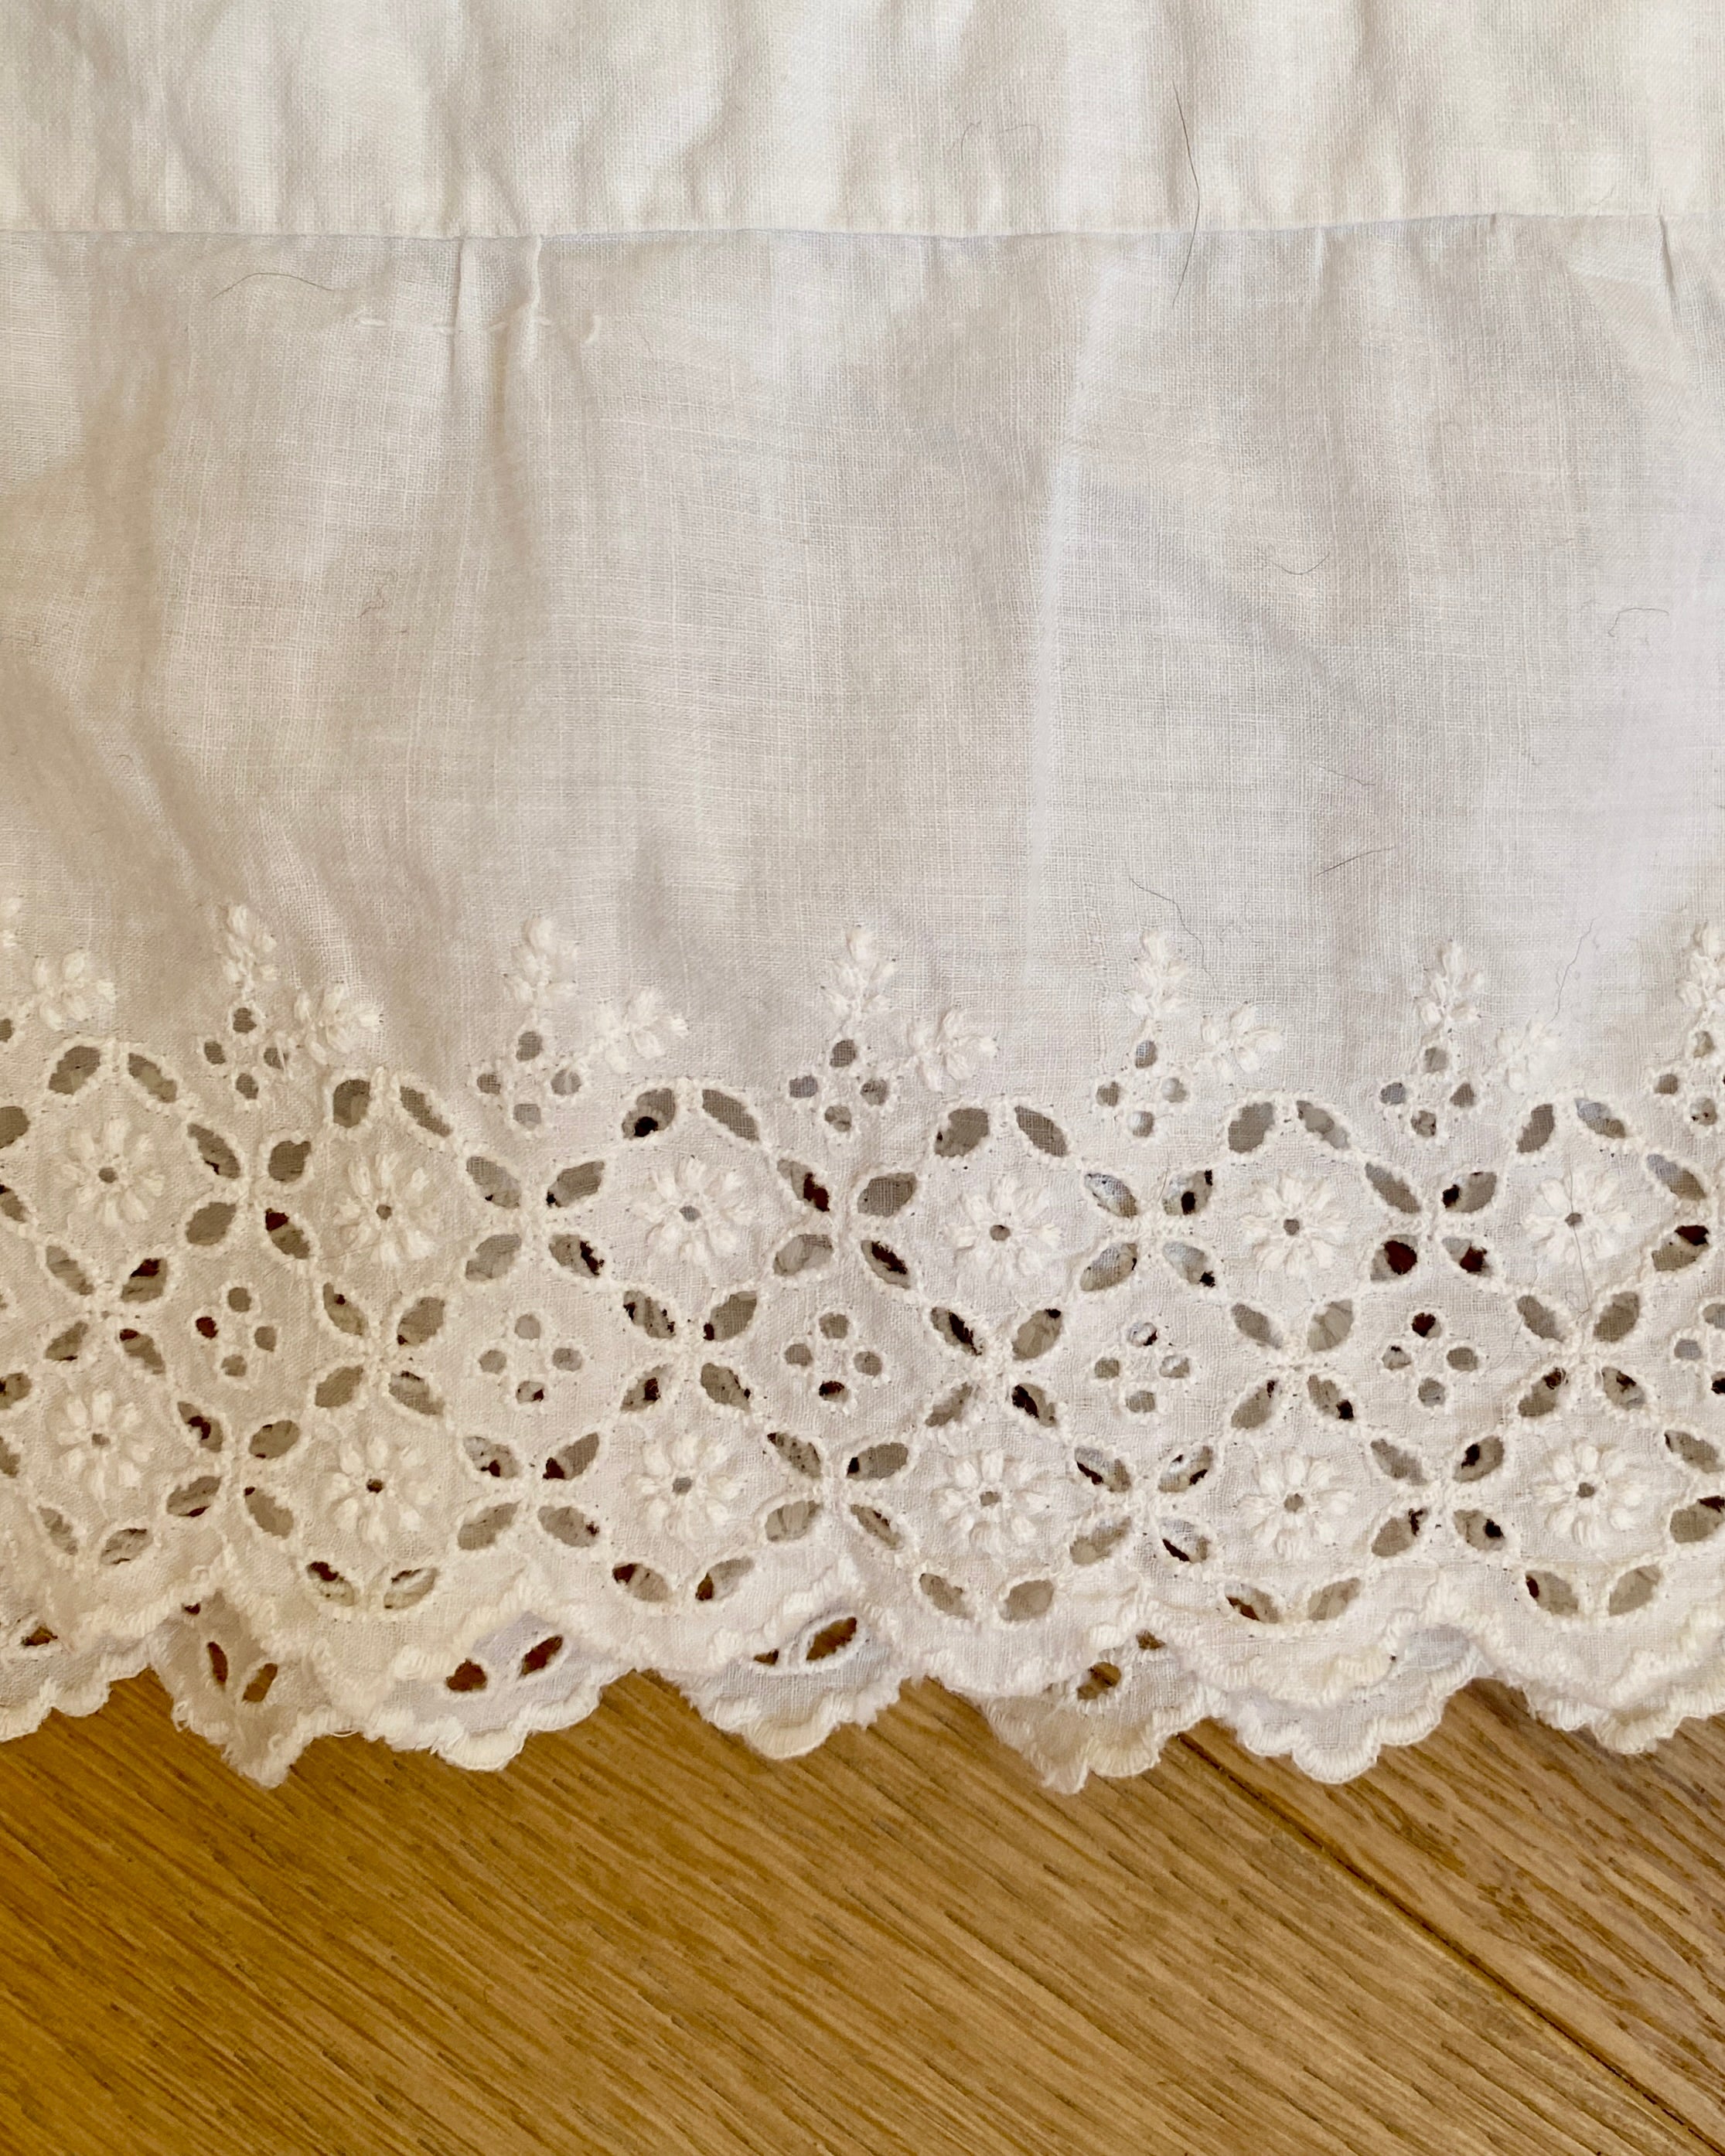 Antique Victorian Mid 1800s White Cotton Pantaloons Bloomers with Eyelet M